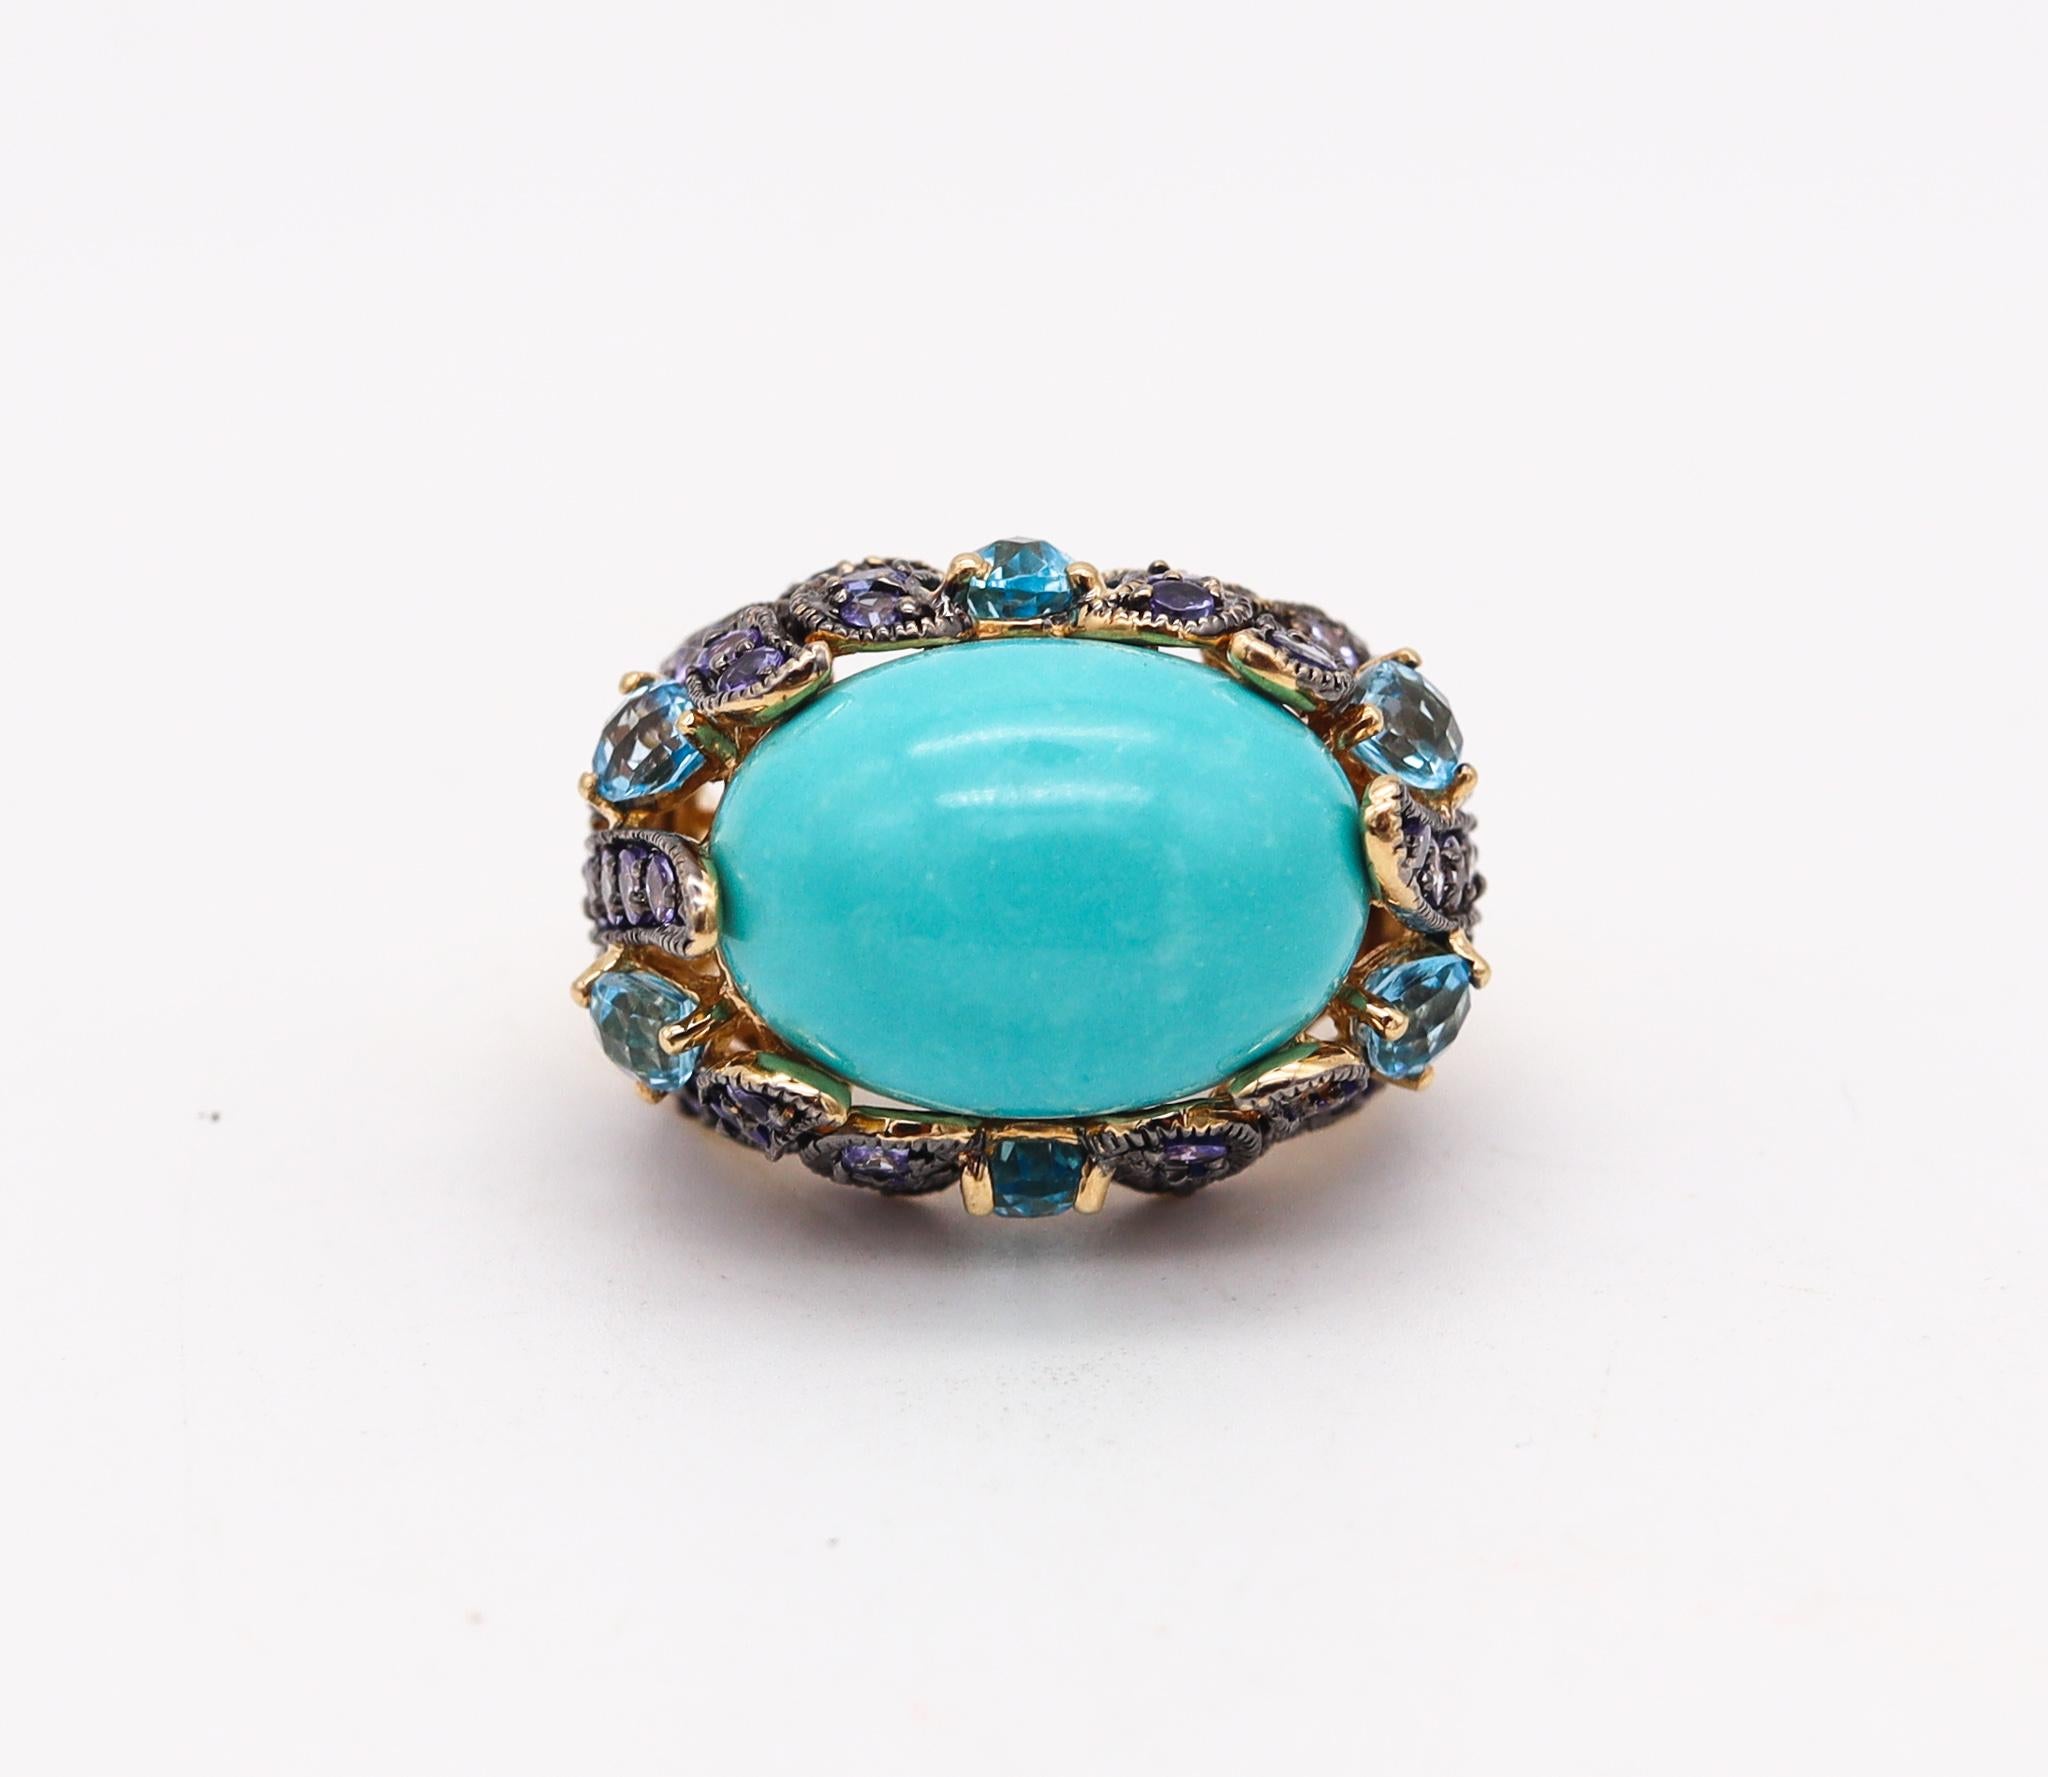 Contemporary Carlo Viani Turquoise Cocktail Ring in 18Kt Gold with 26.64 Cts Iolites & Topaz